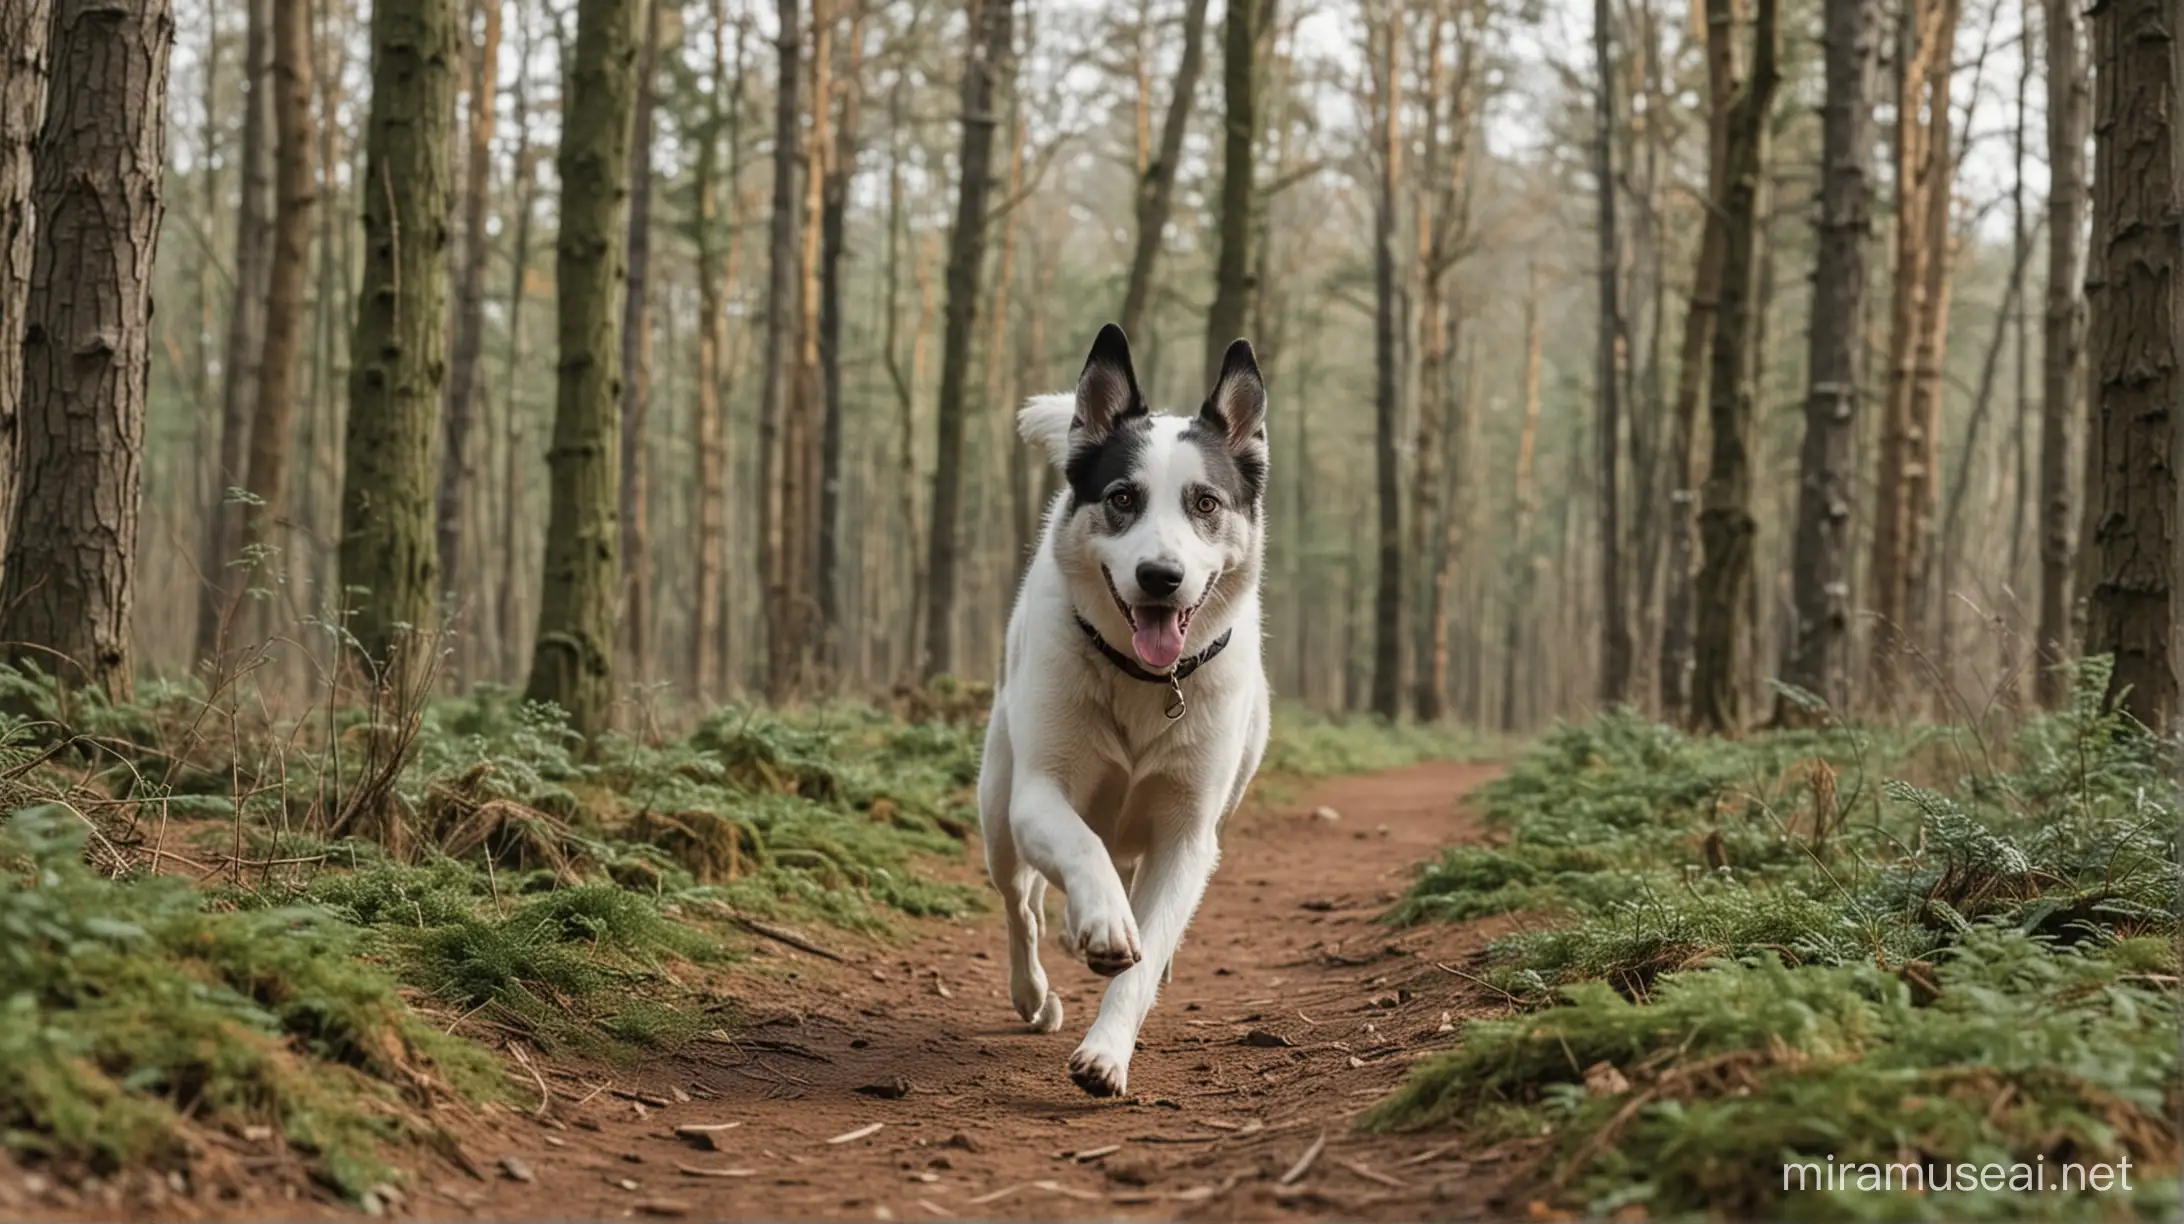 Energetic Dog Running Amidst Lush Forest Canopy